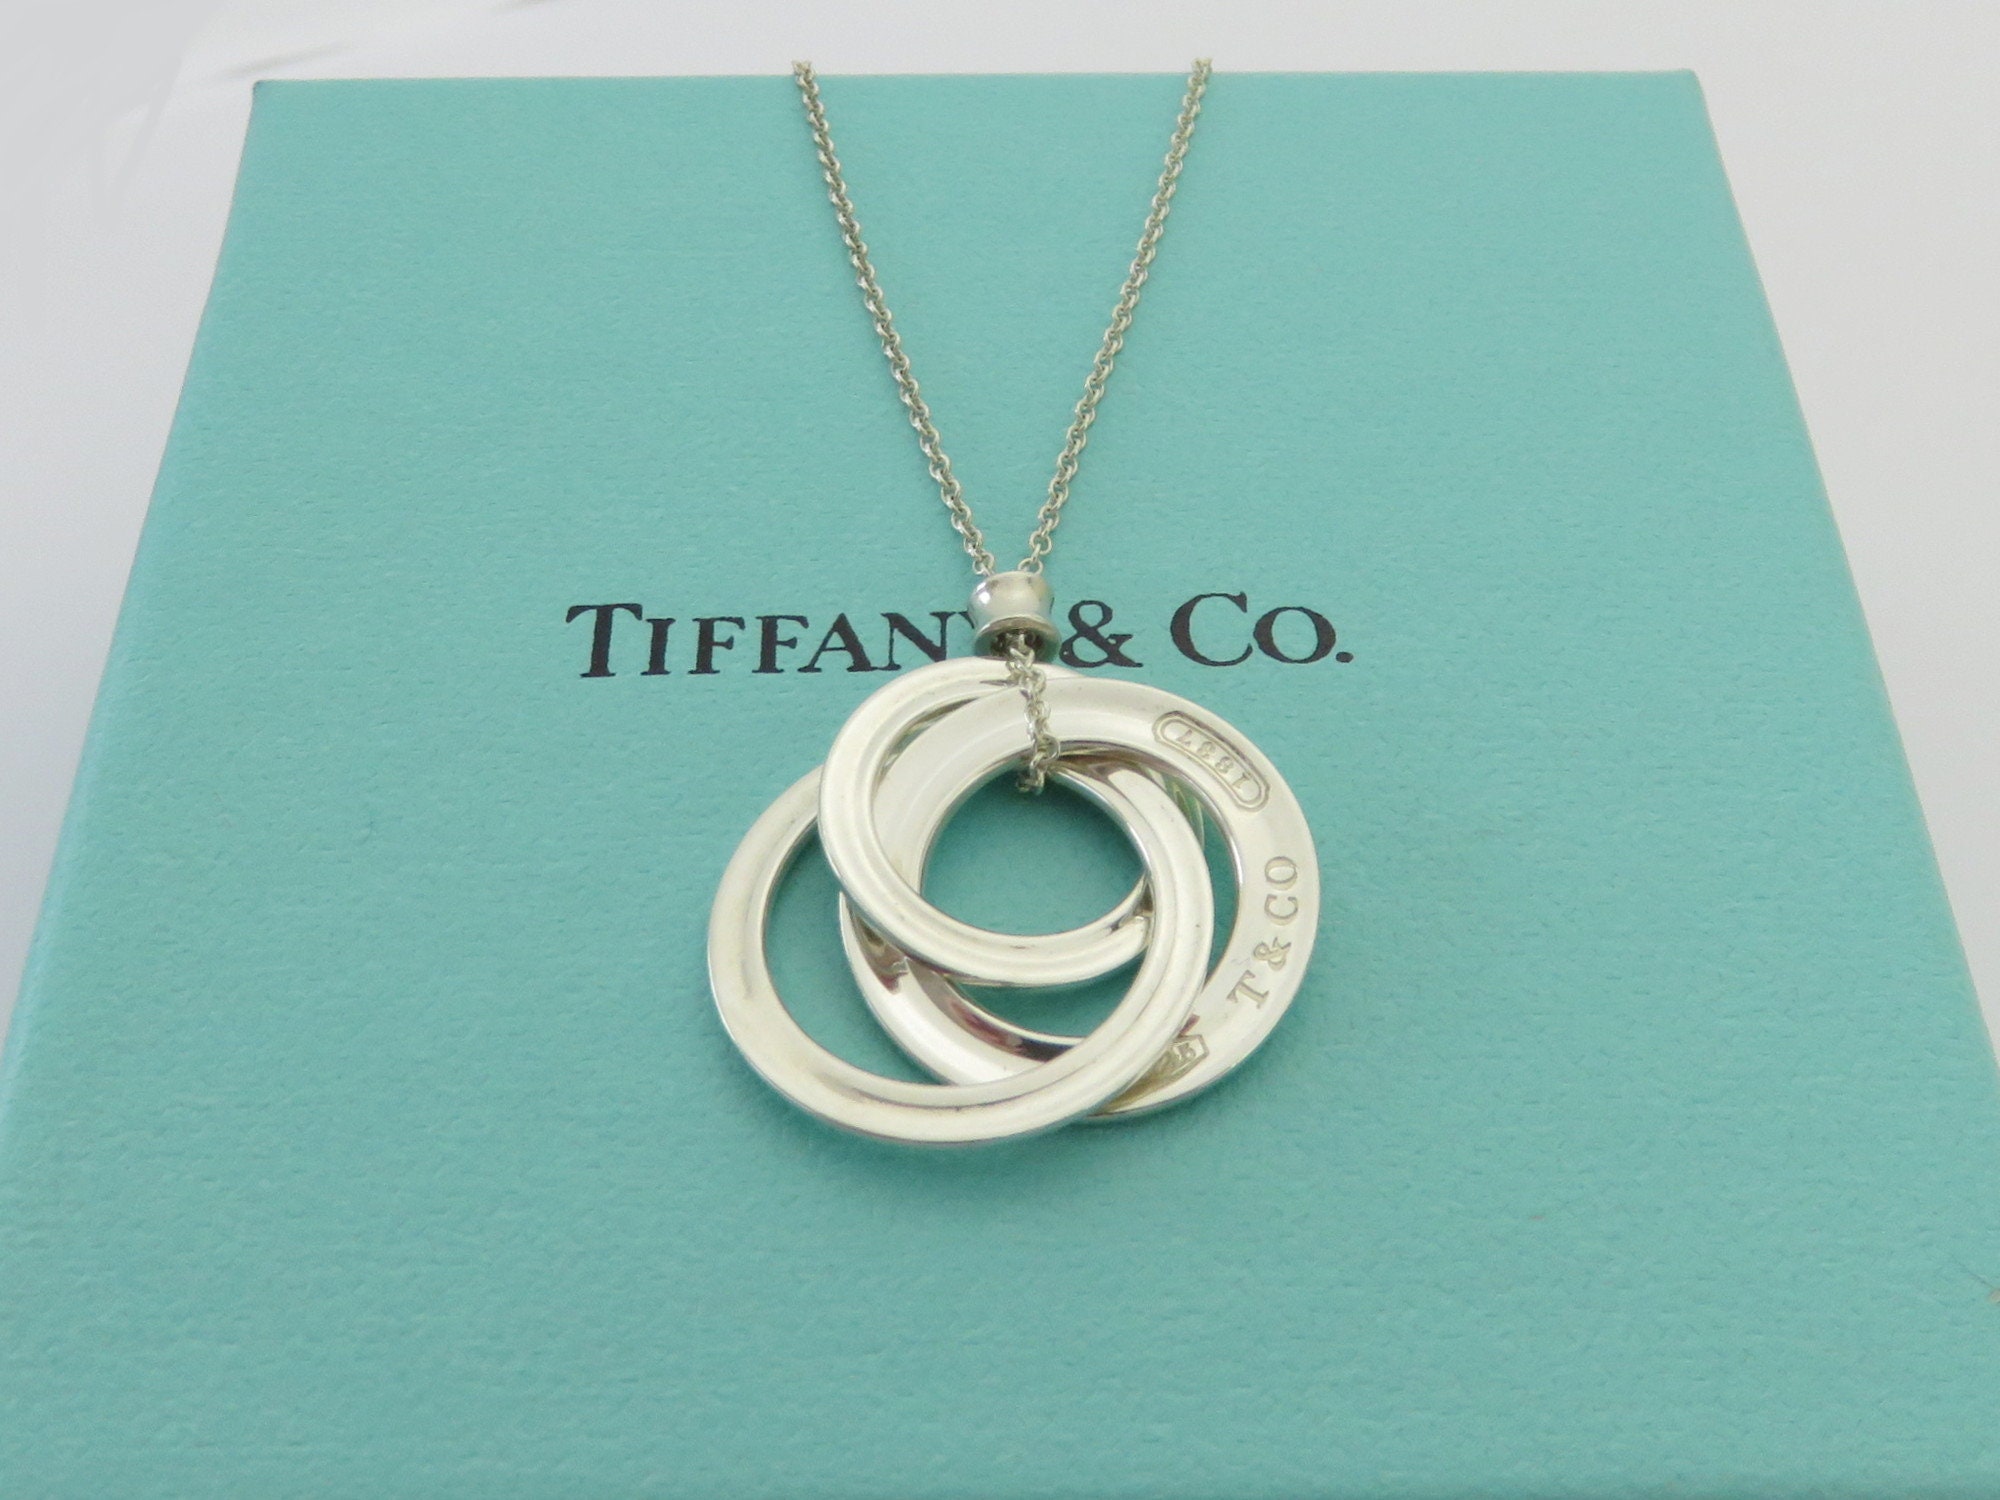 miriam two ring necklace • favorite niece - EFYTAL Jewelry